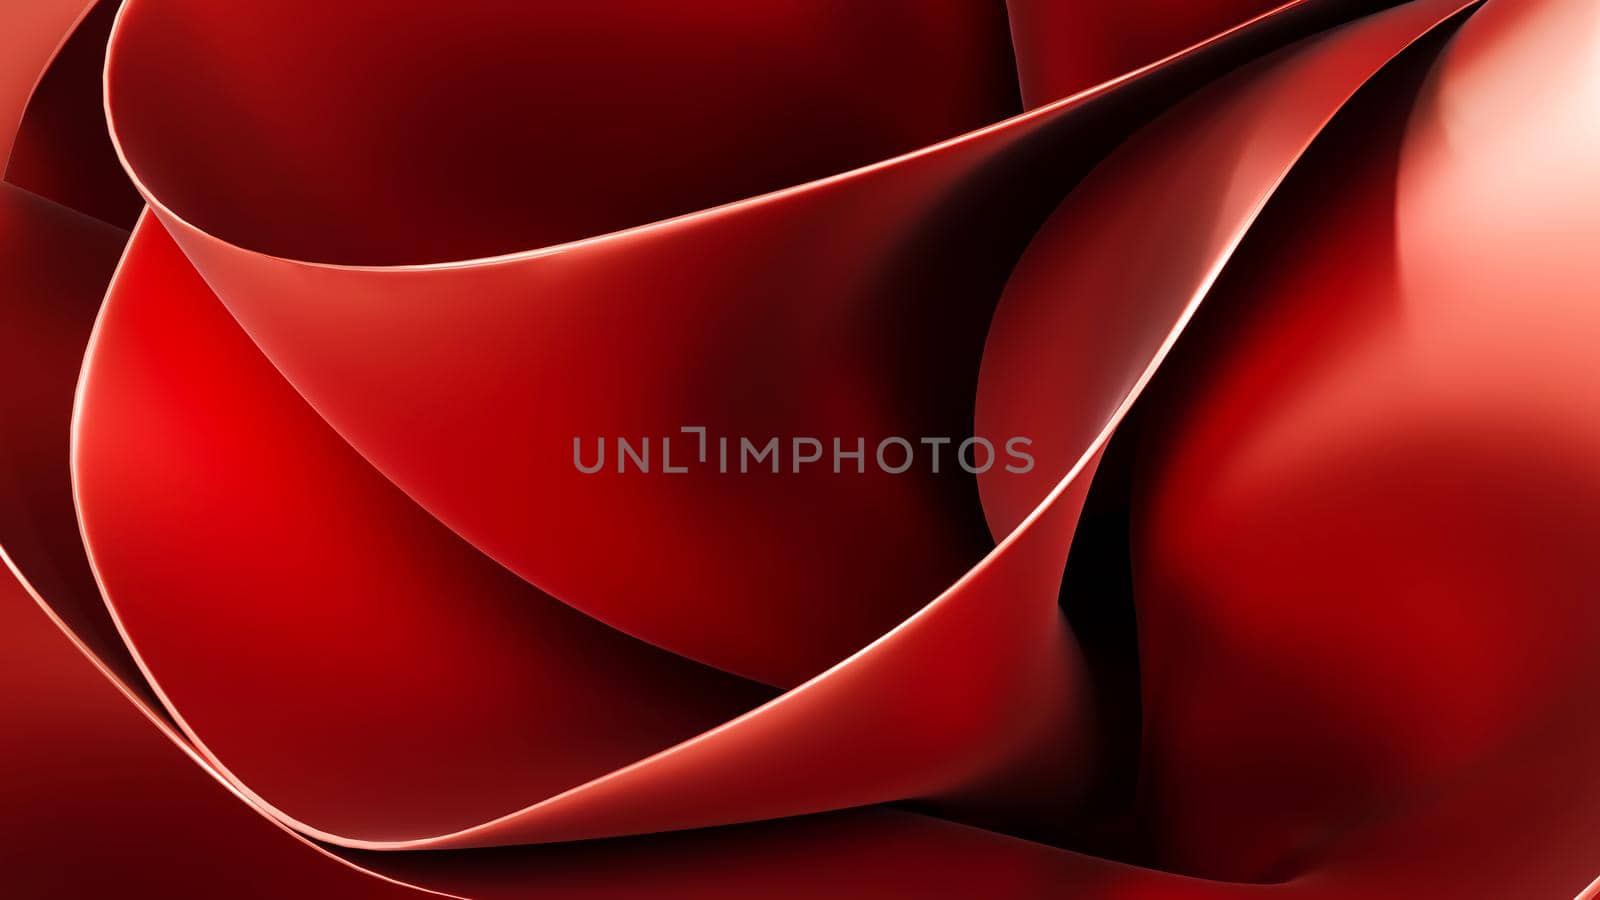 Luxury red background with drapery, pleated fabric. Metallic rose abstract flower fashion wallpaper with wavy layers, 3d rendering